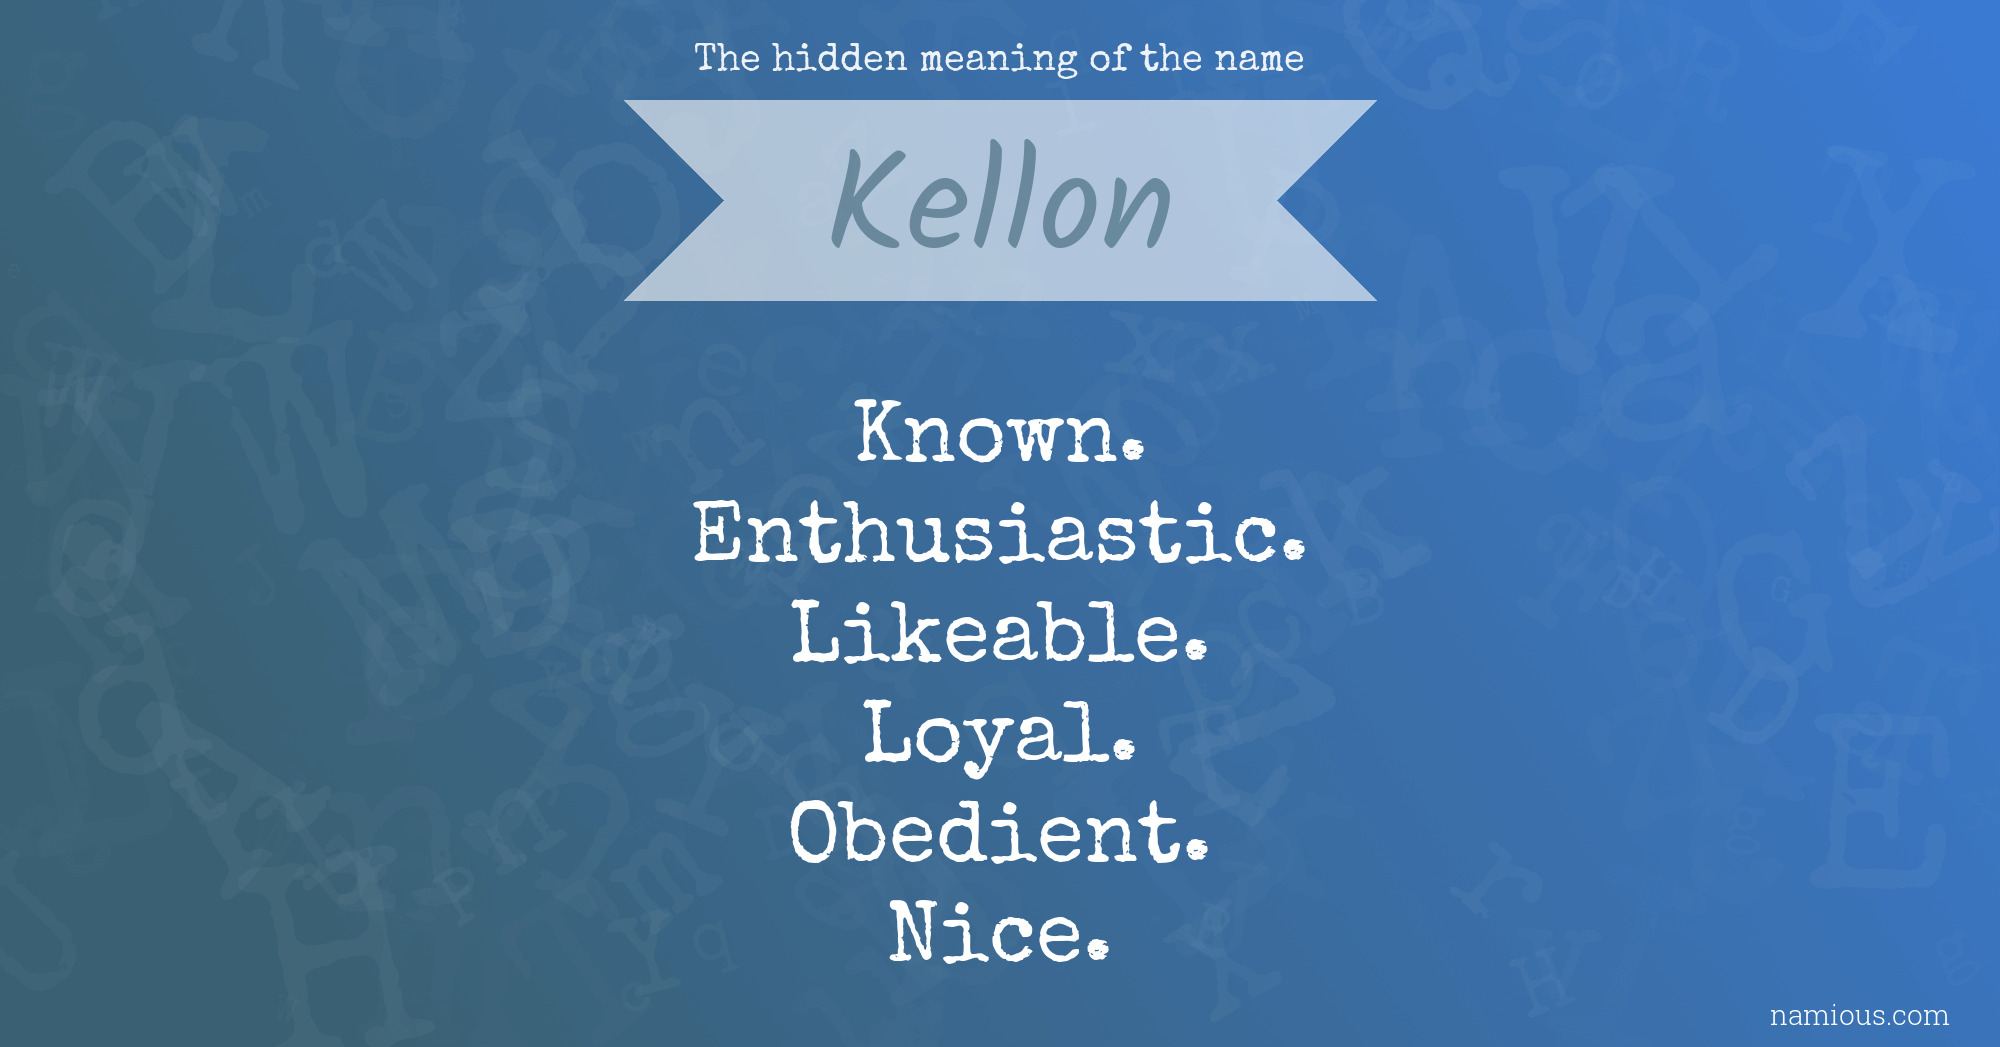 The hidden meaning of the name Kellon